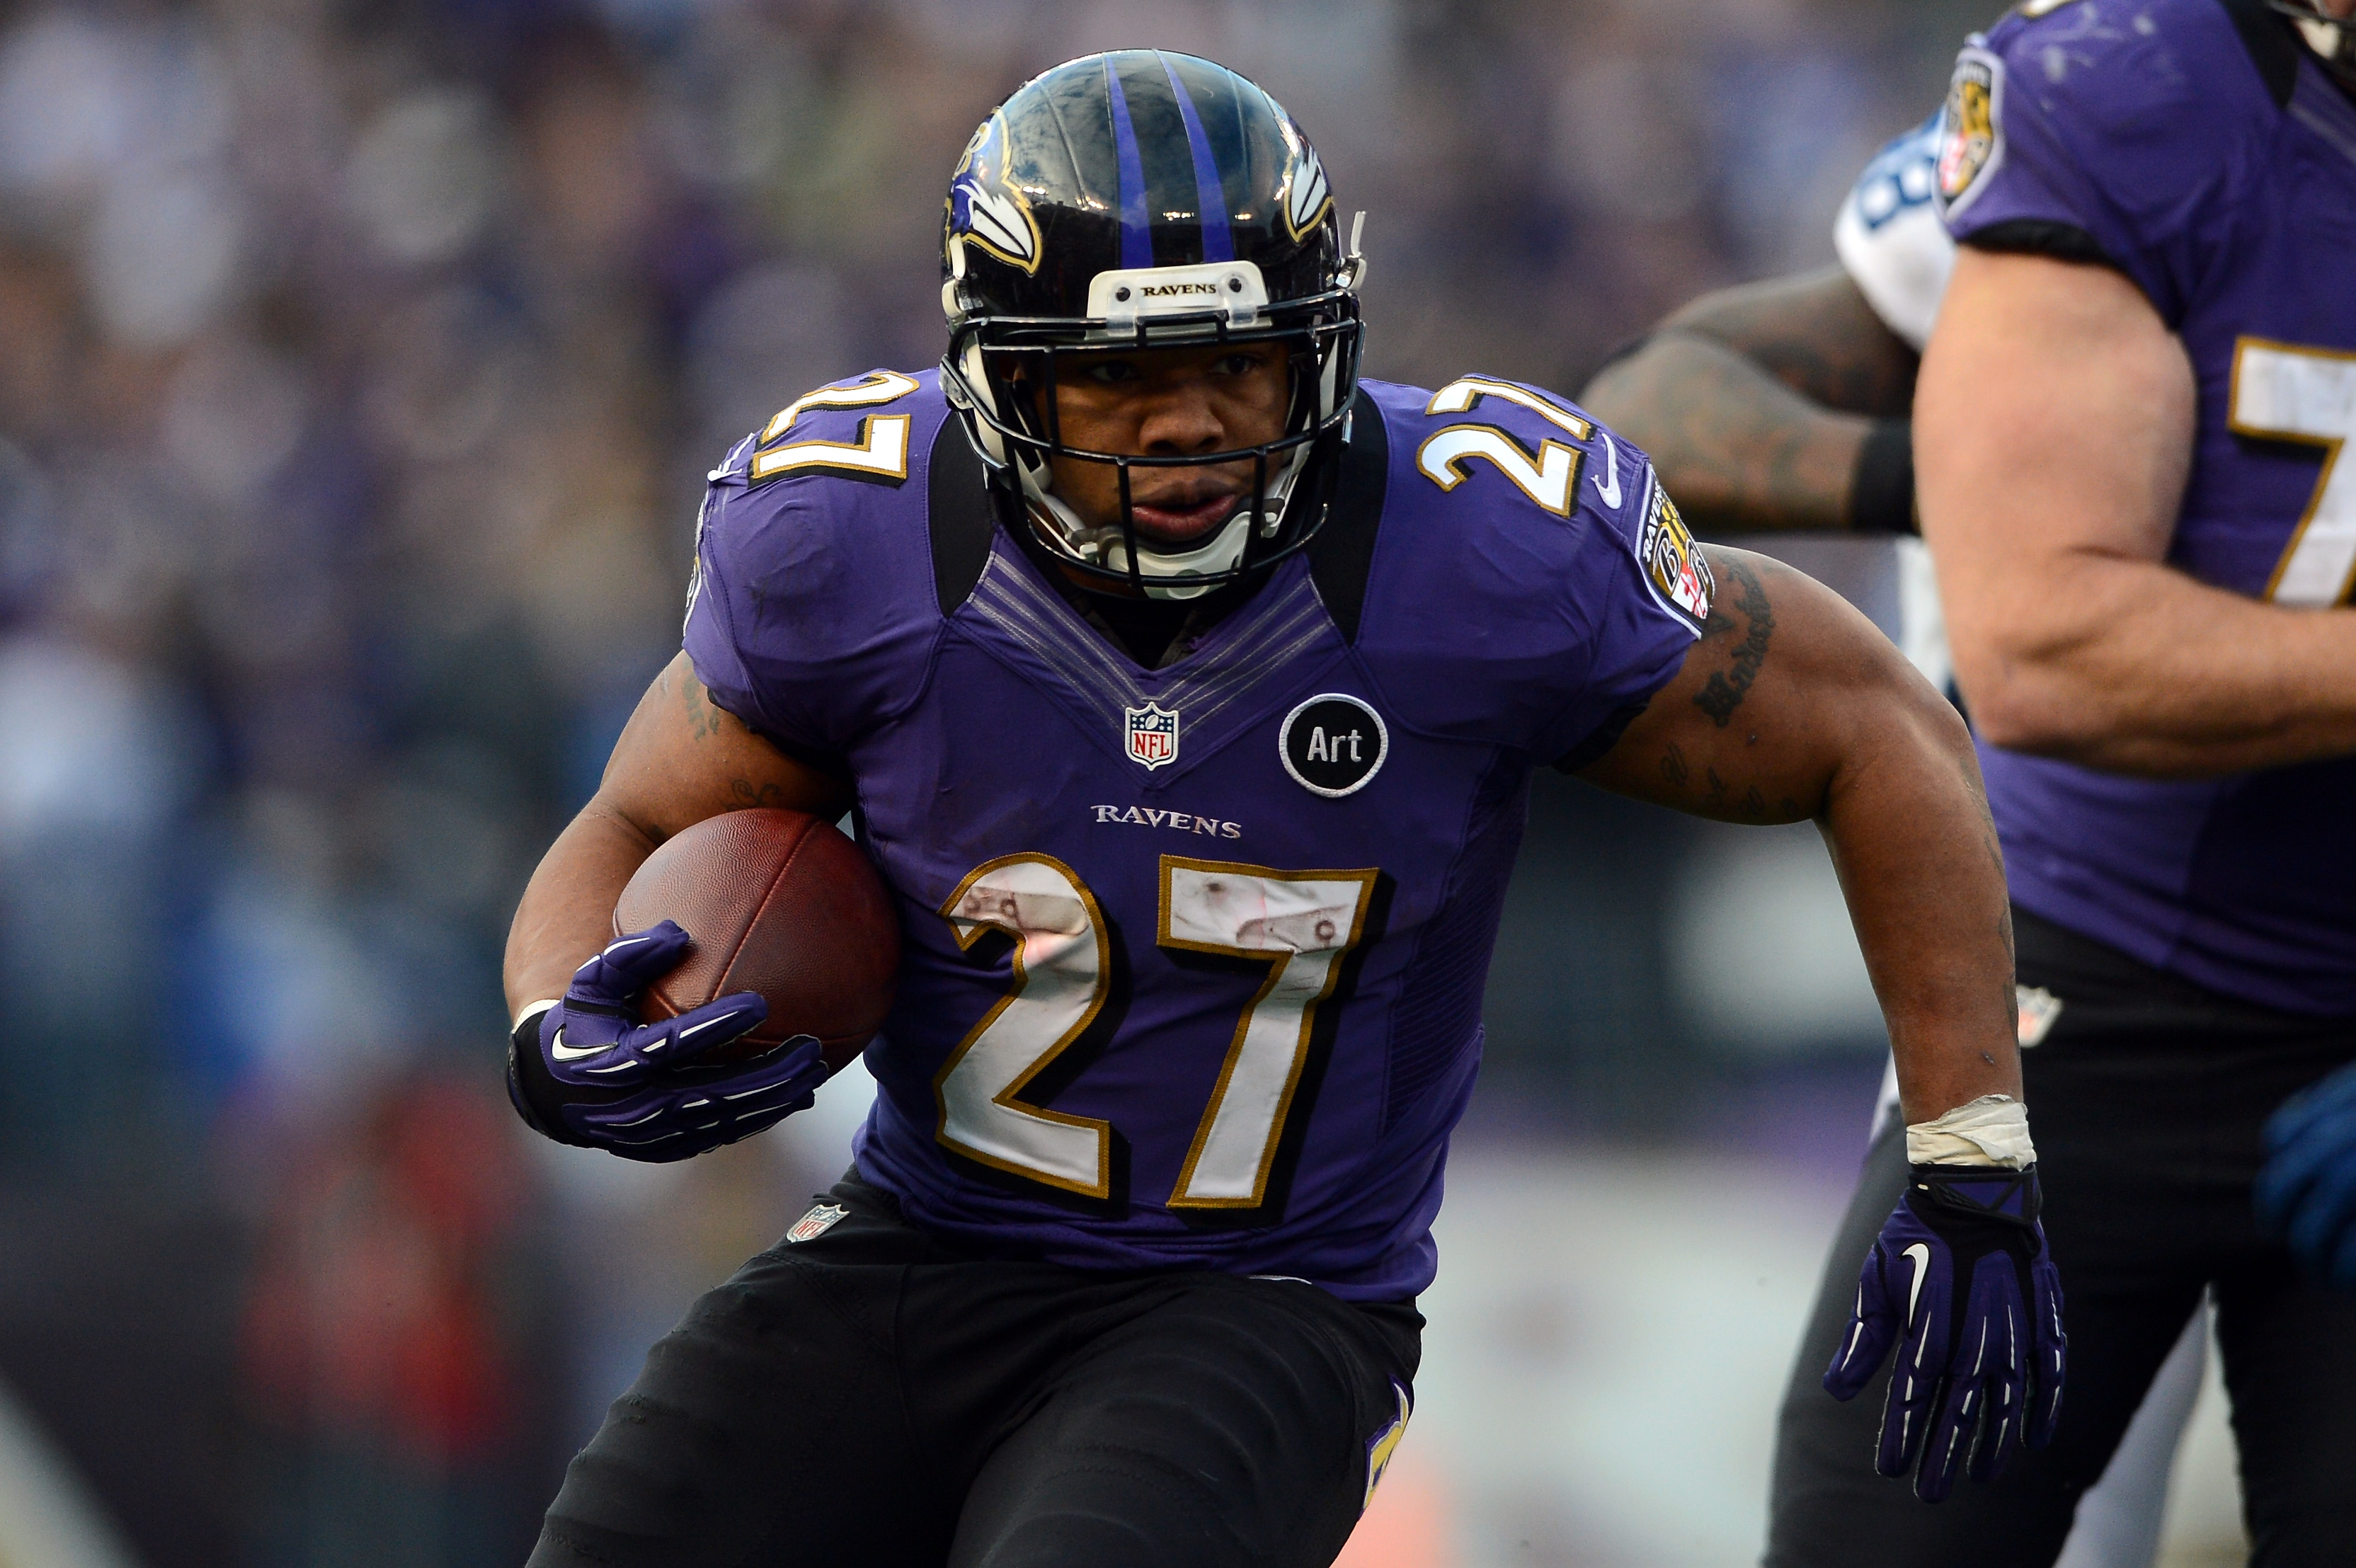 Ray Rice #27 of the Baltimore Ravens runs the ball during the AFC Wild Card Playoff Game on January 6, 2013 in Baltimore, Maryland. (Patrick Smith&mdash;Getty Images)